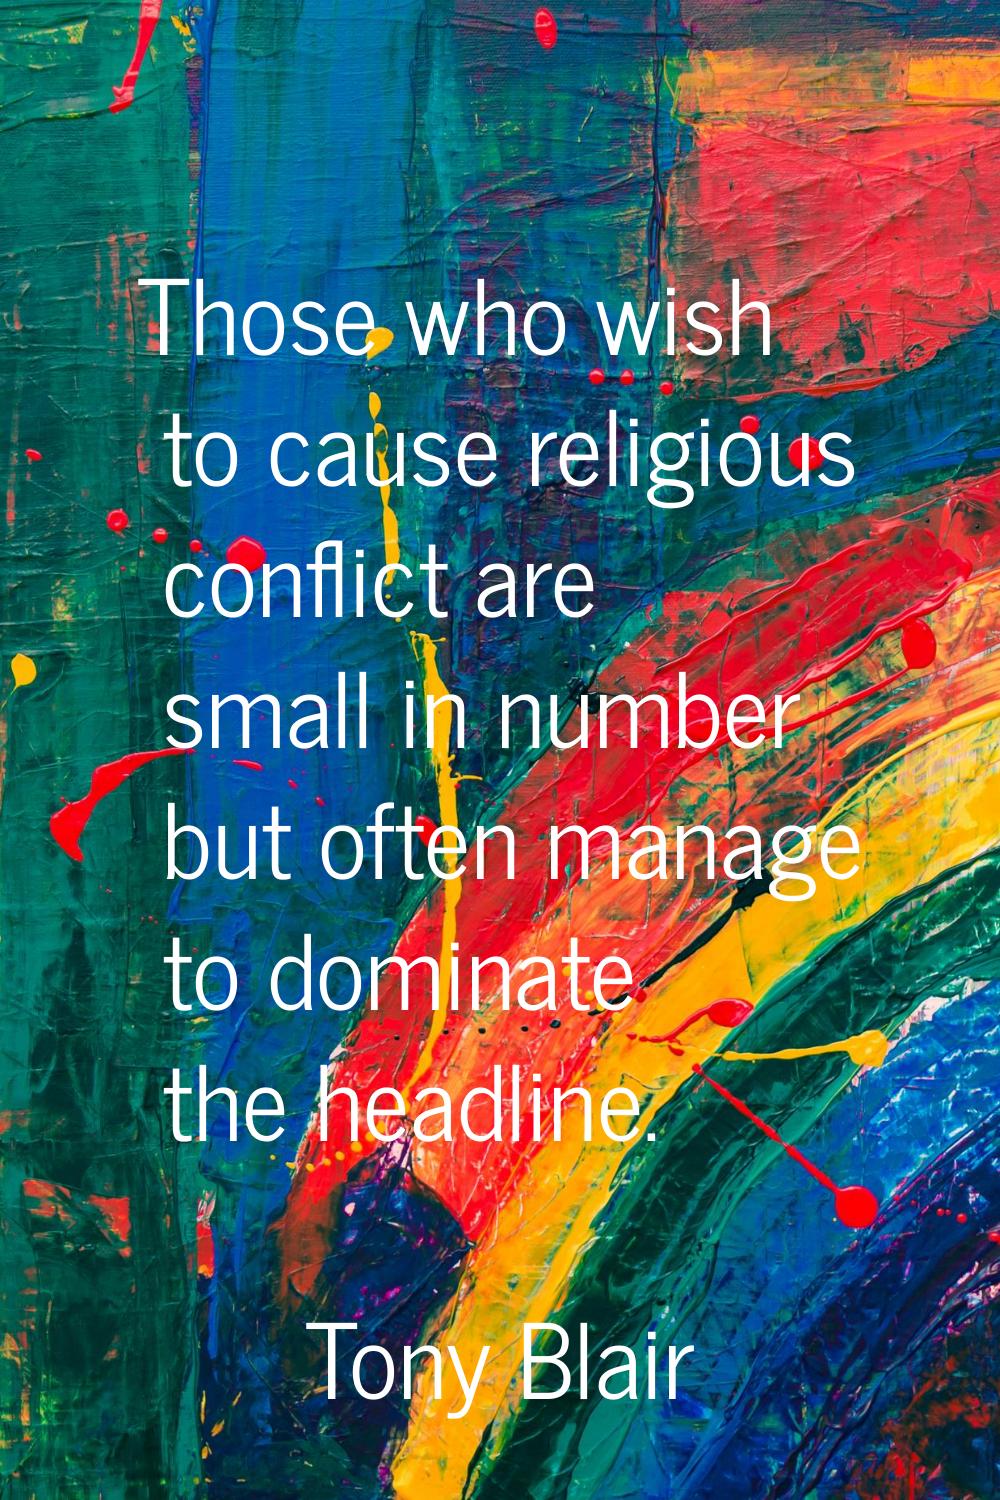 Those who wish to cause religious conflict are small in number but often manage to dominate the hea